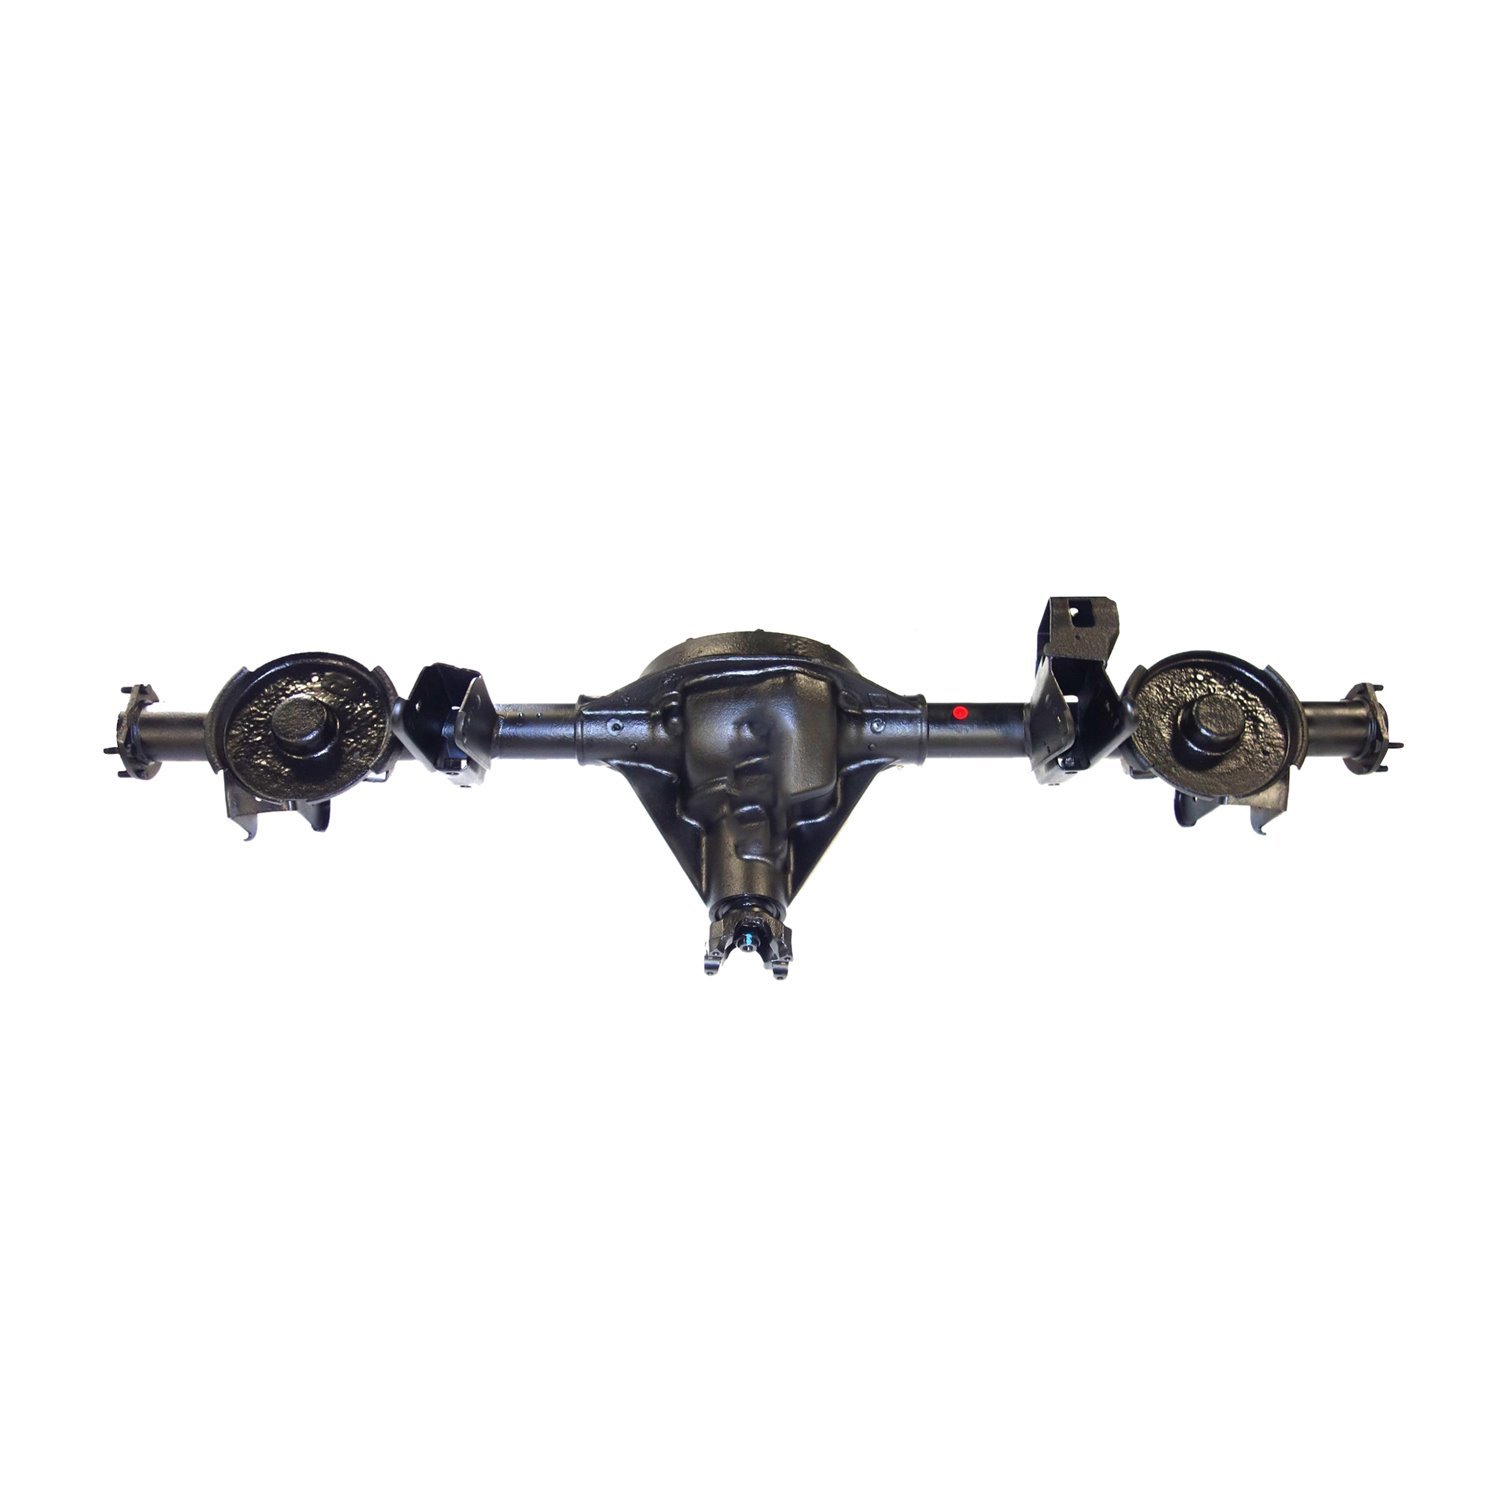 Remanufactured Complete Axle Assembly for Dana 35 03-05 Jeep Wrangler 3.73 Ratio with ABS